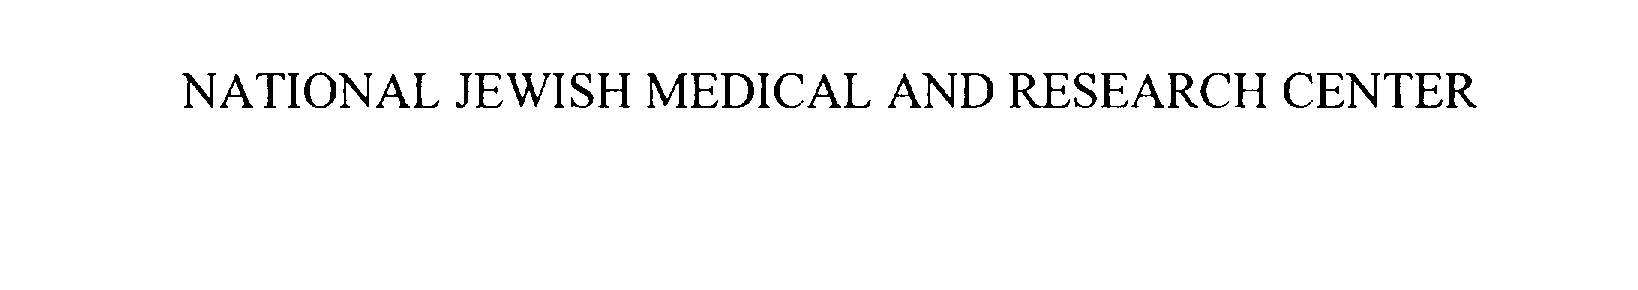 Trademark Logo NATIONAL JEWISH MEDICAL AND RESEARCH CENTER